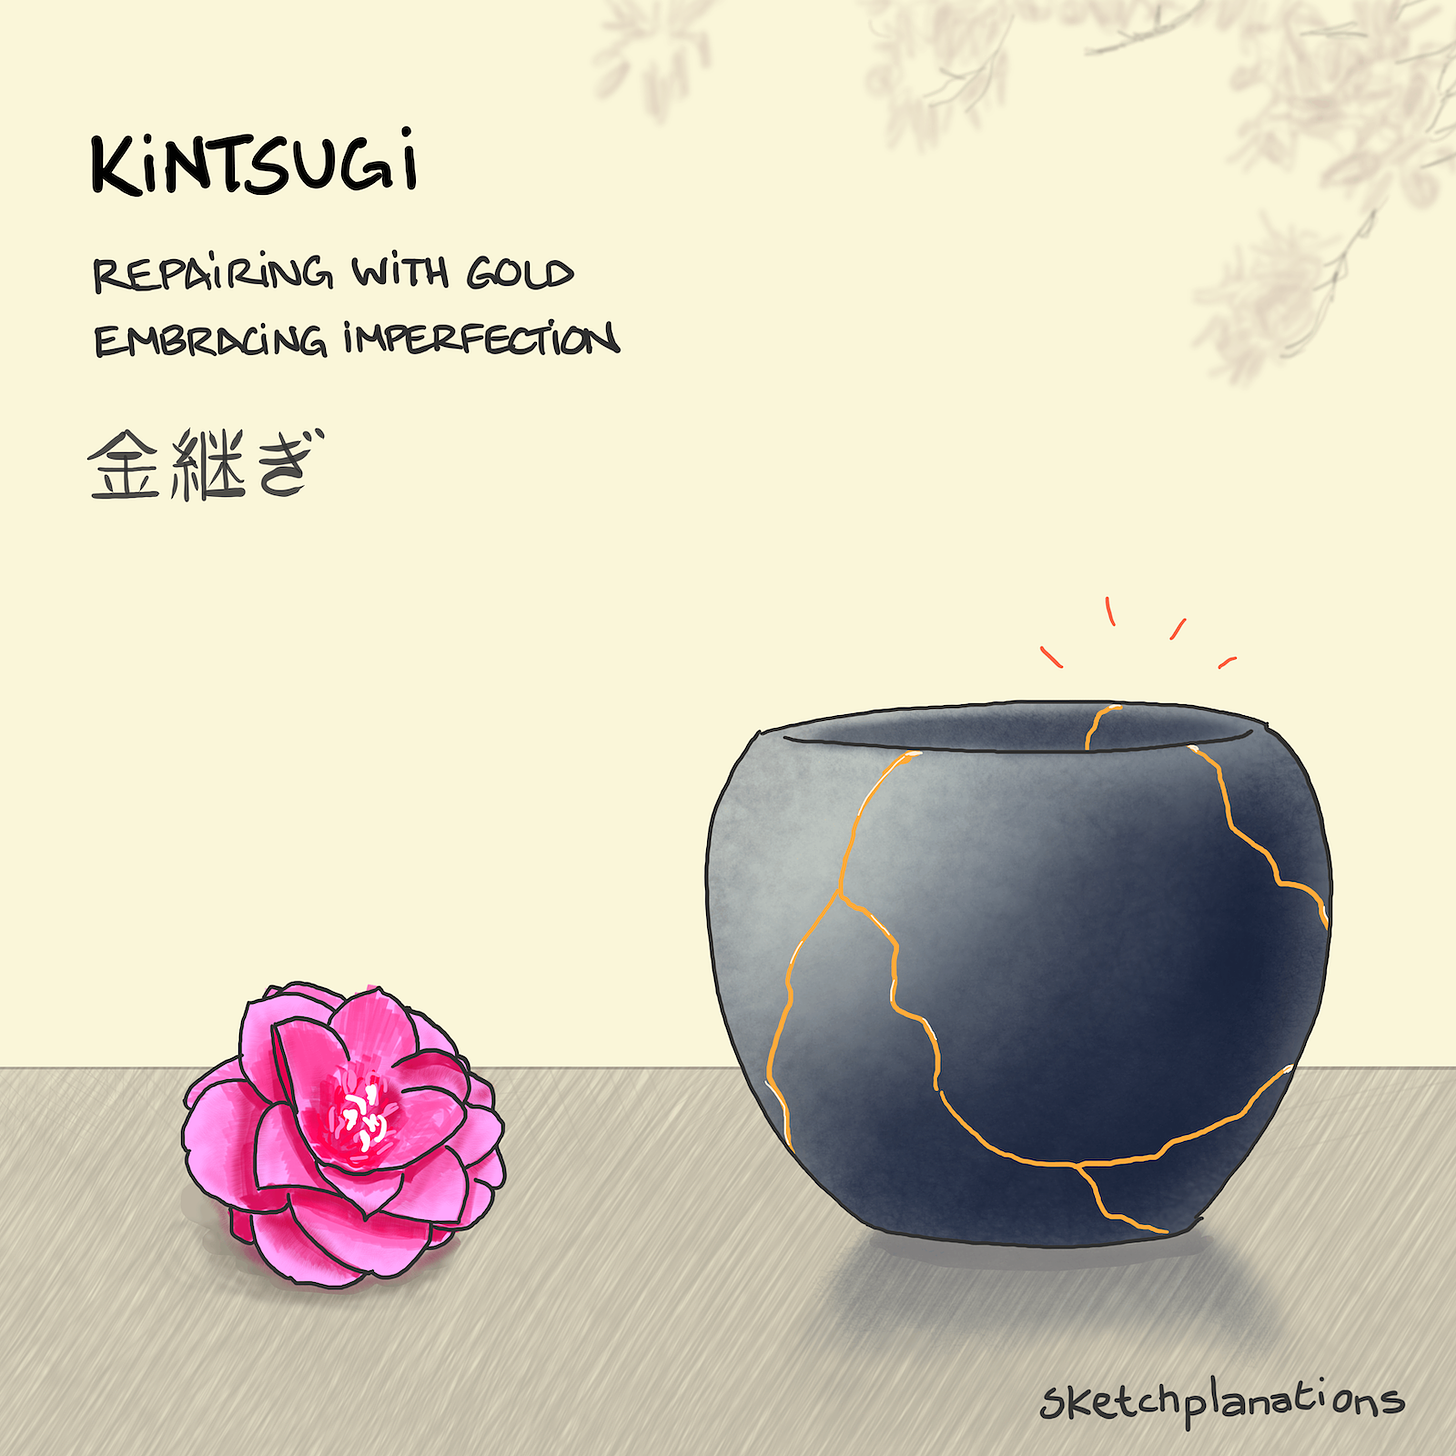 A bowl repaired with kintsugi with bright gold seams visible next to a flower